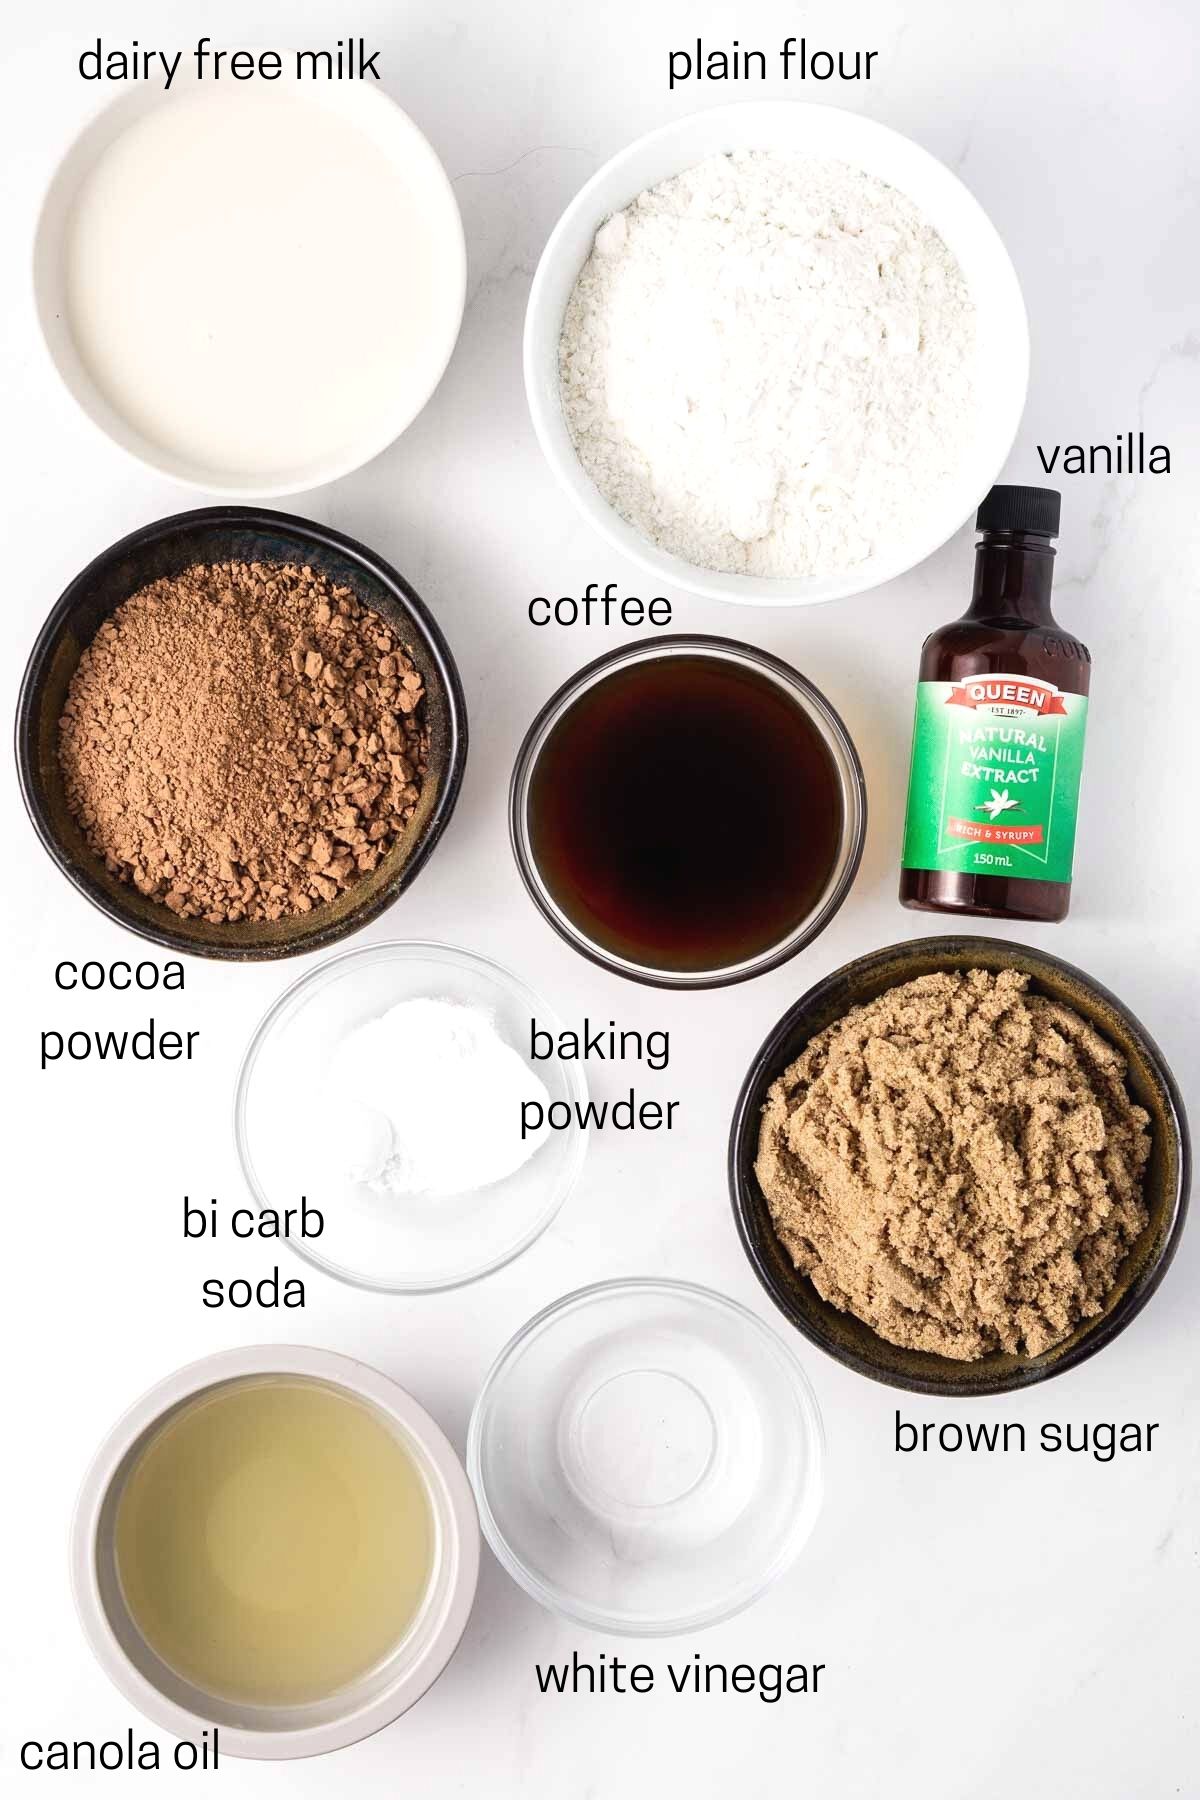 All ingredients needed for dairy free chocolate cake laid out.